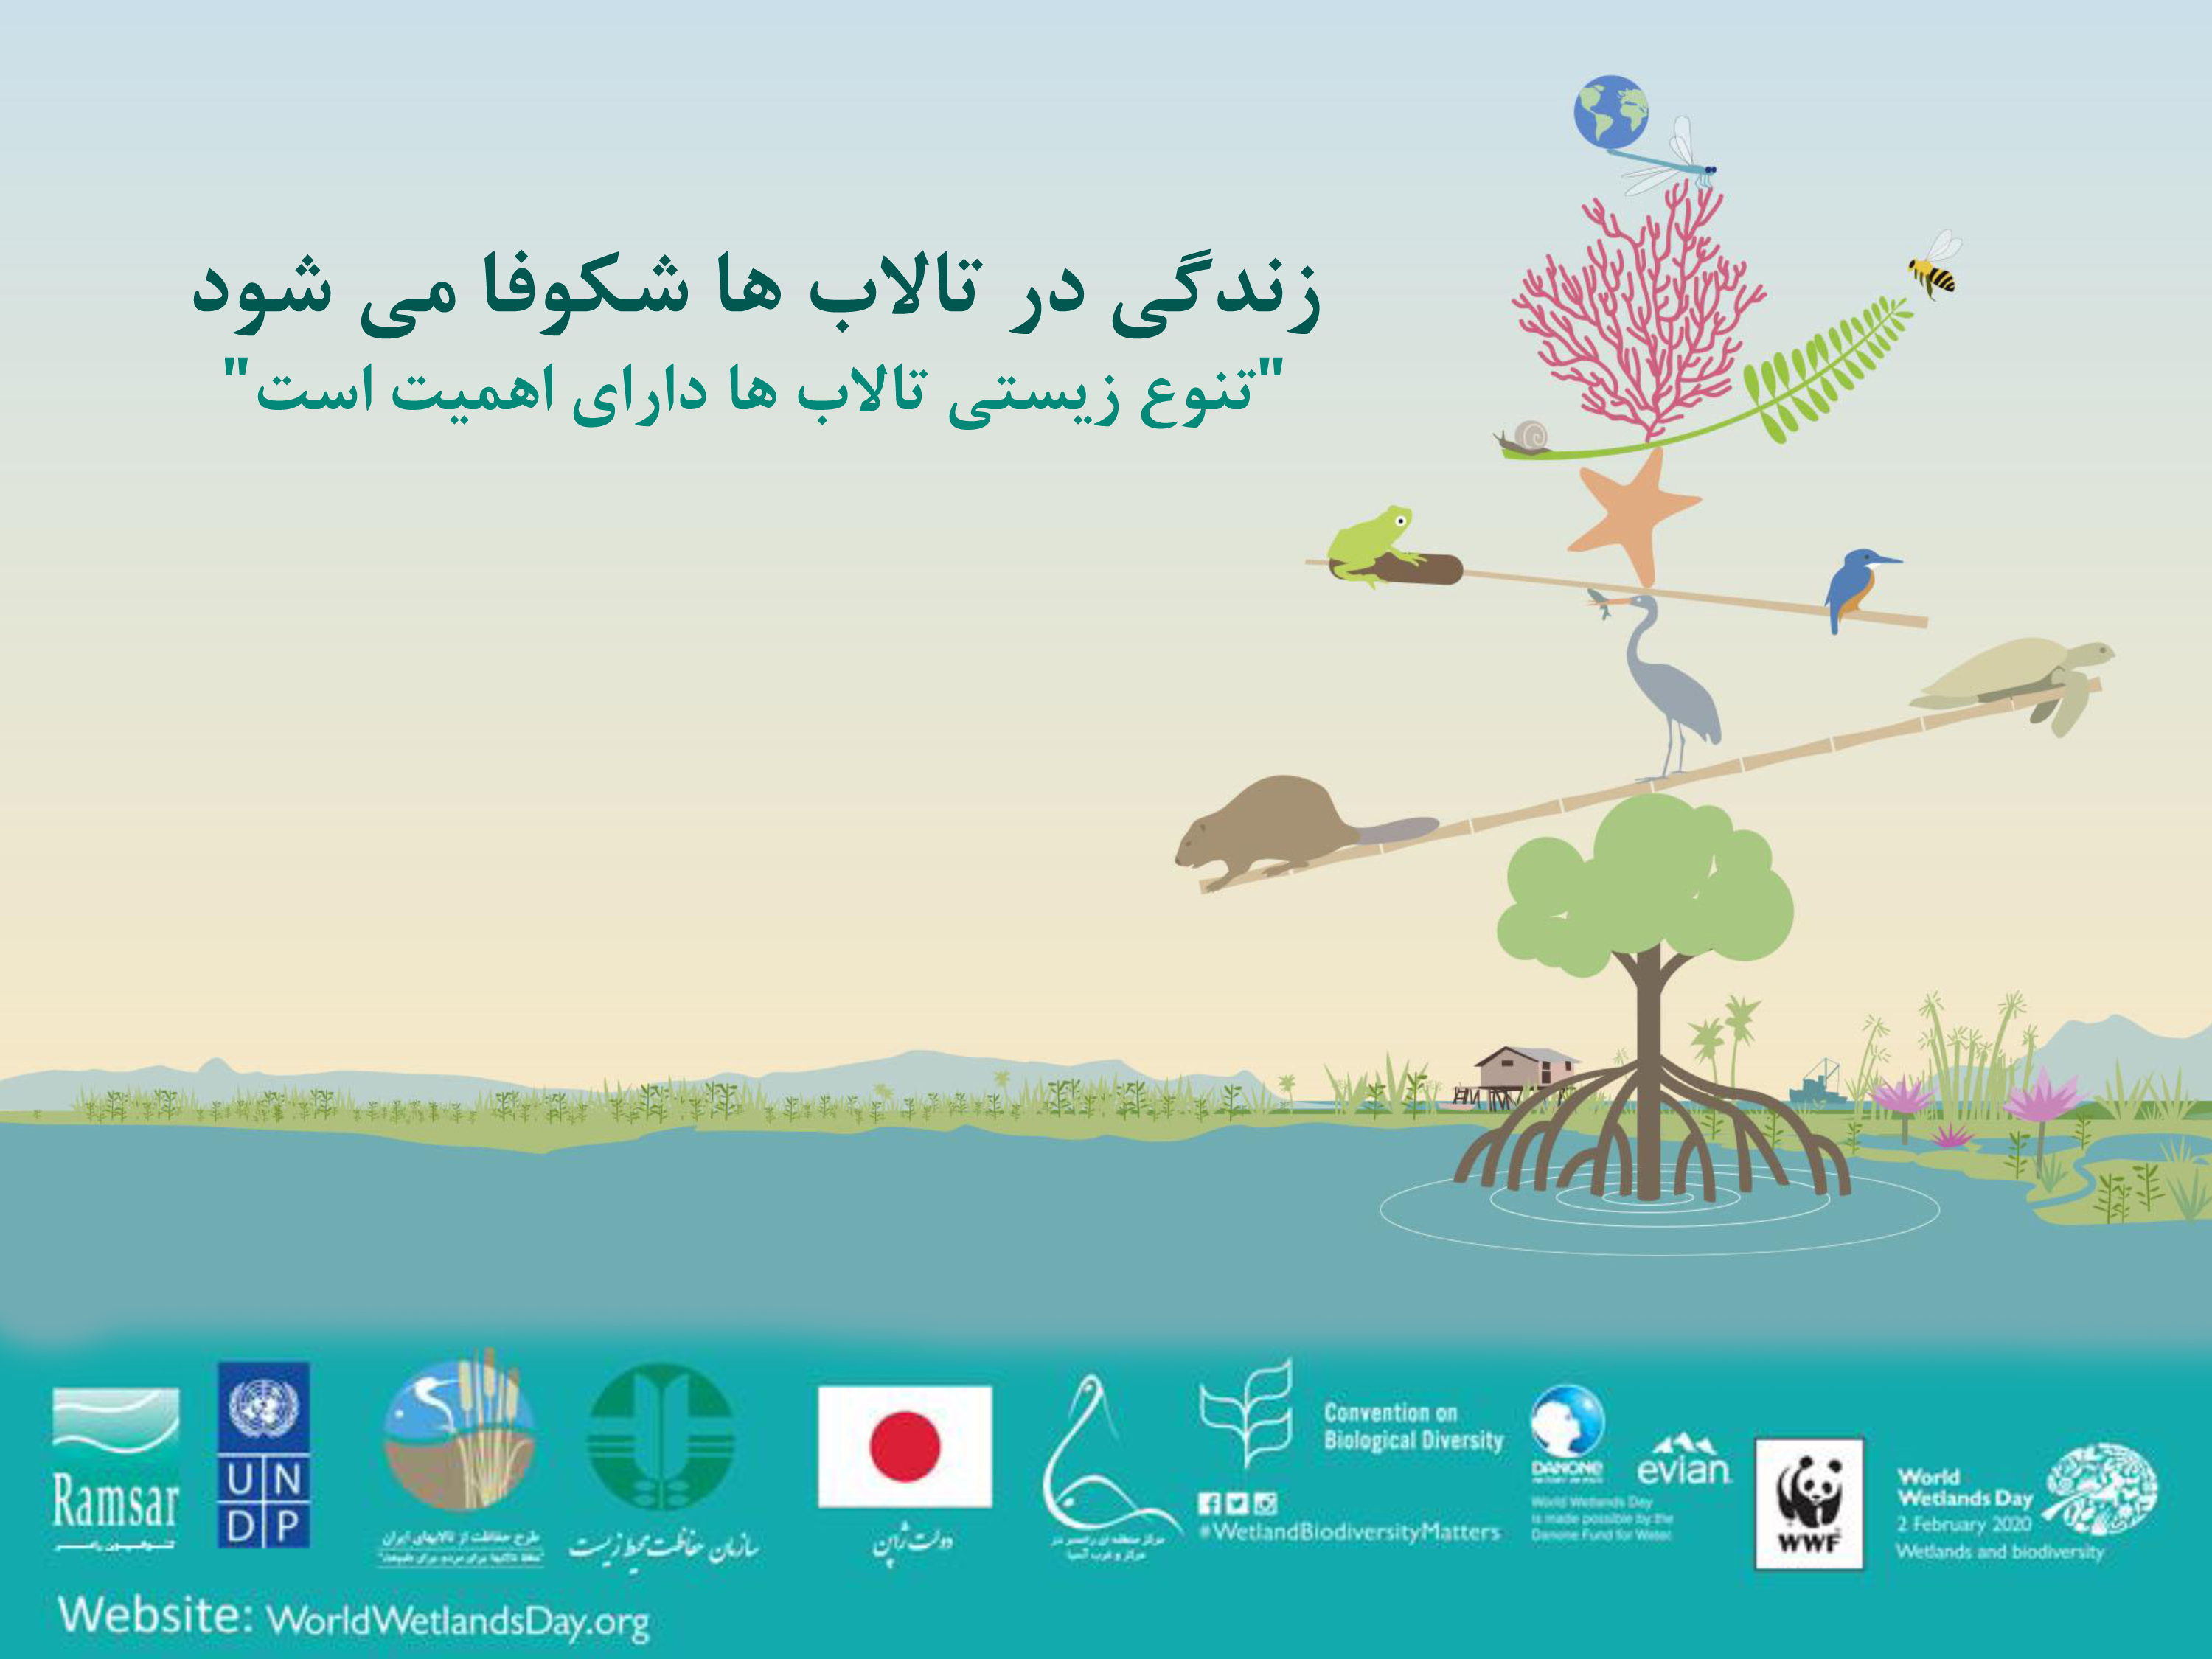 The customs of the international wetlands’ day will be observed by the Department of Environment of Kurdistan province and Zarivar wetland.